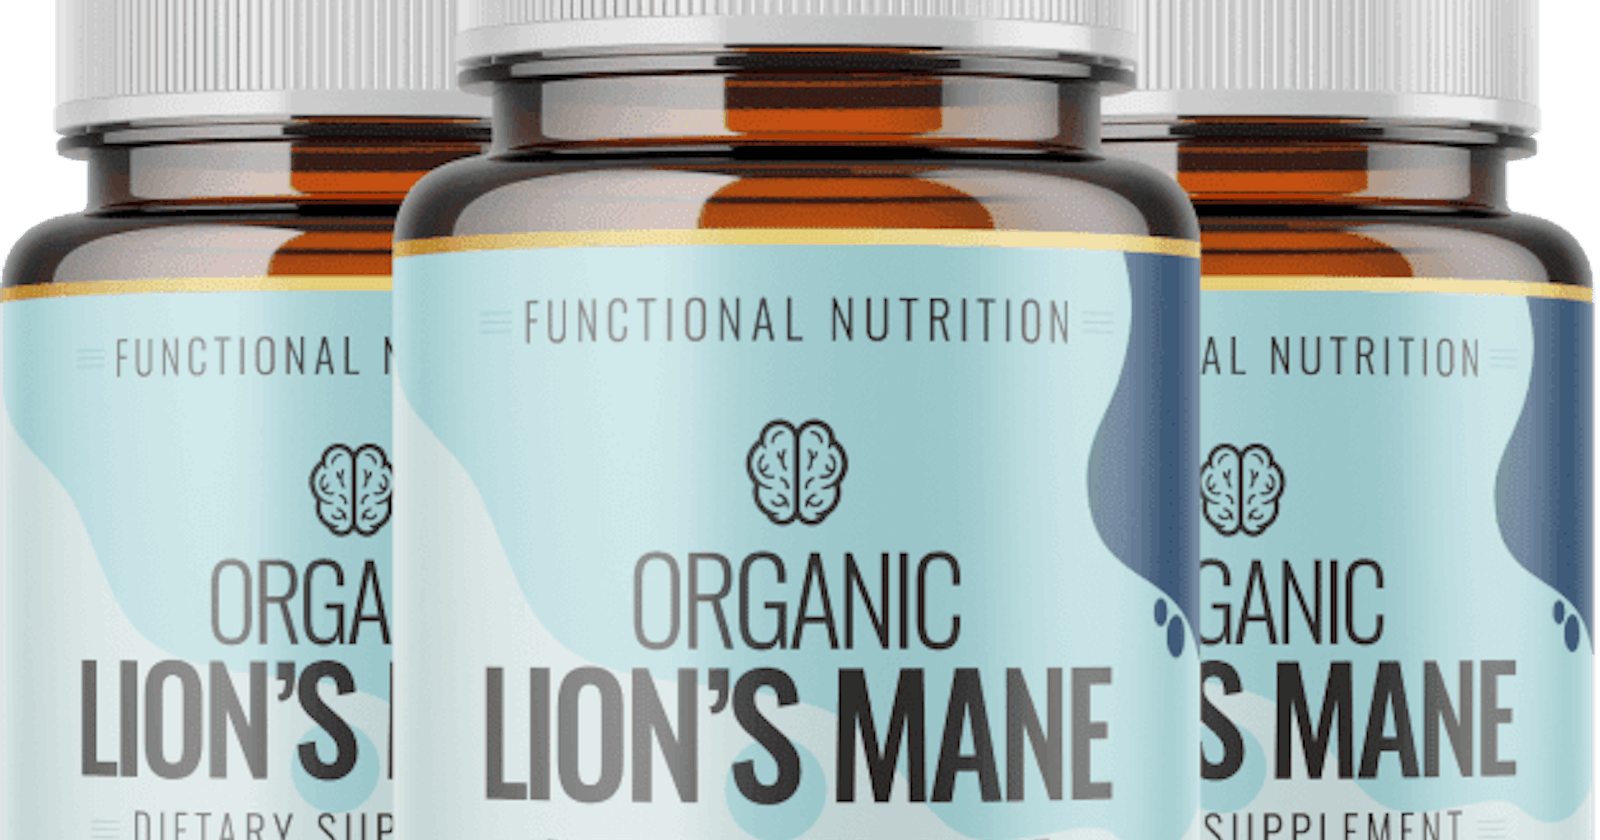 Organic Lion's Mane from Functional Nutrition [Website Advisory]